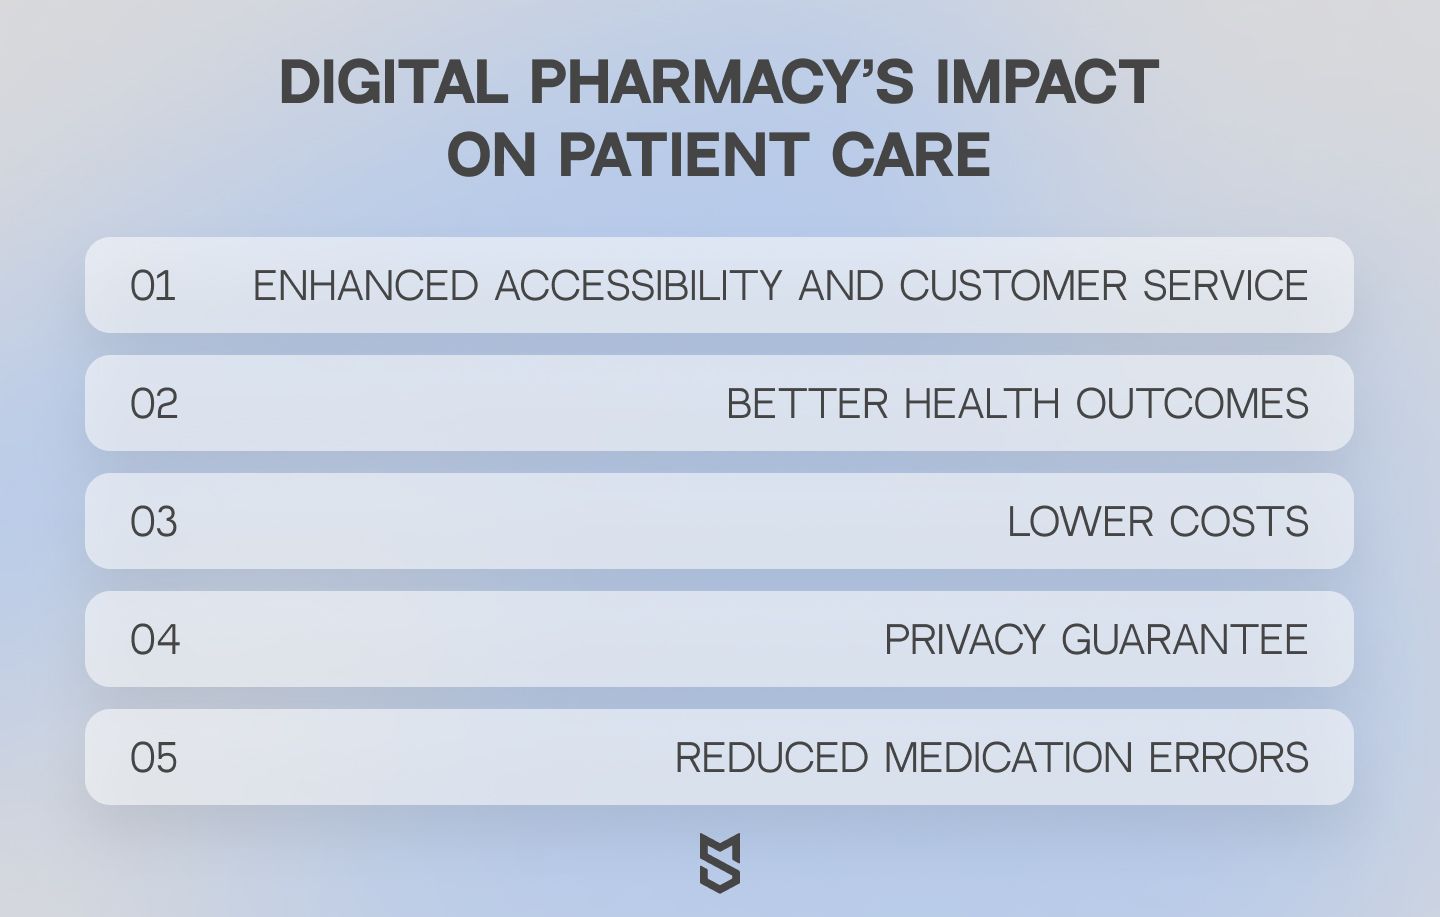 Digital pharmacy’s impact on patient care